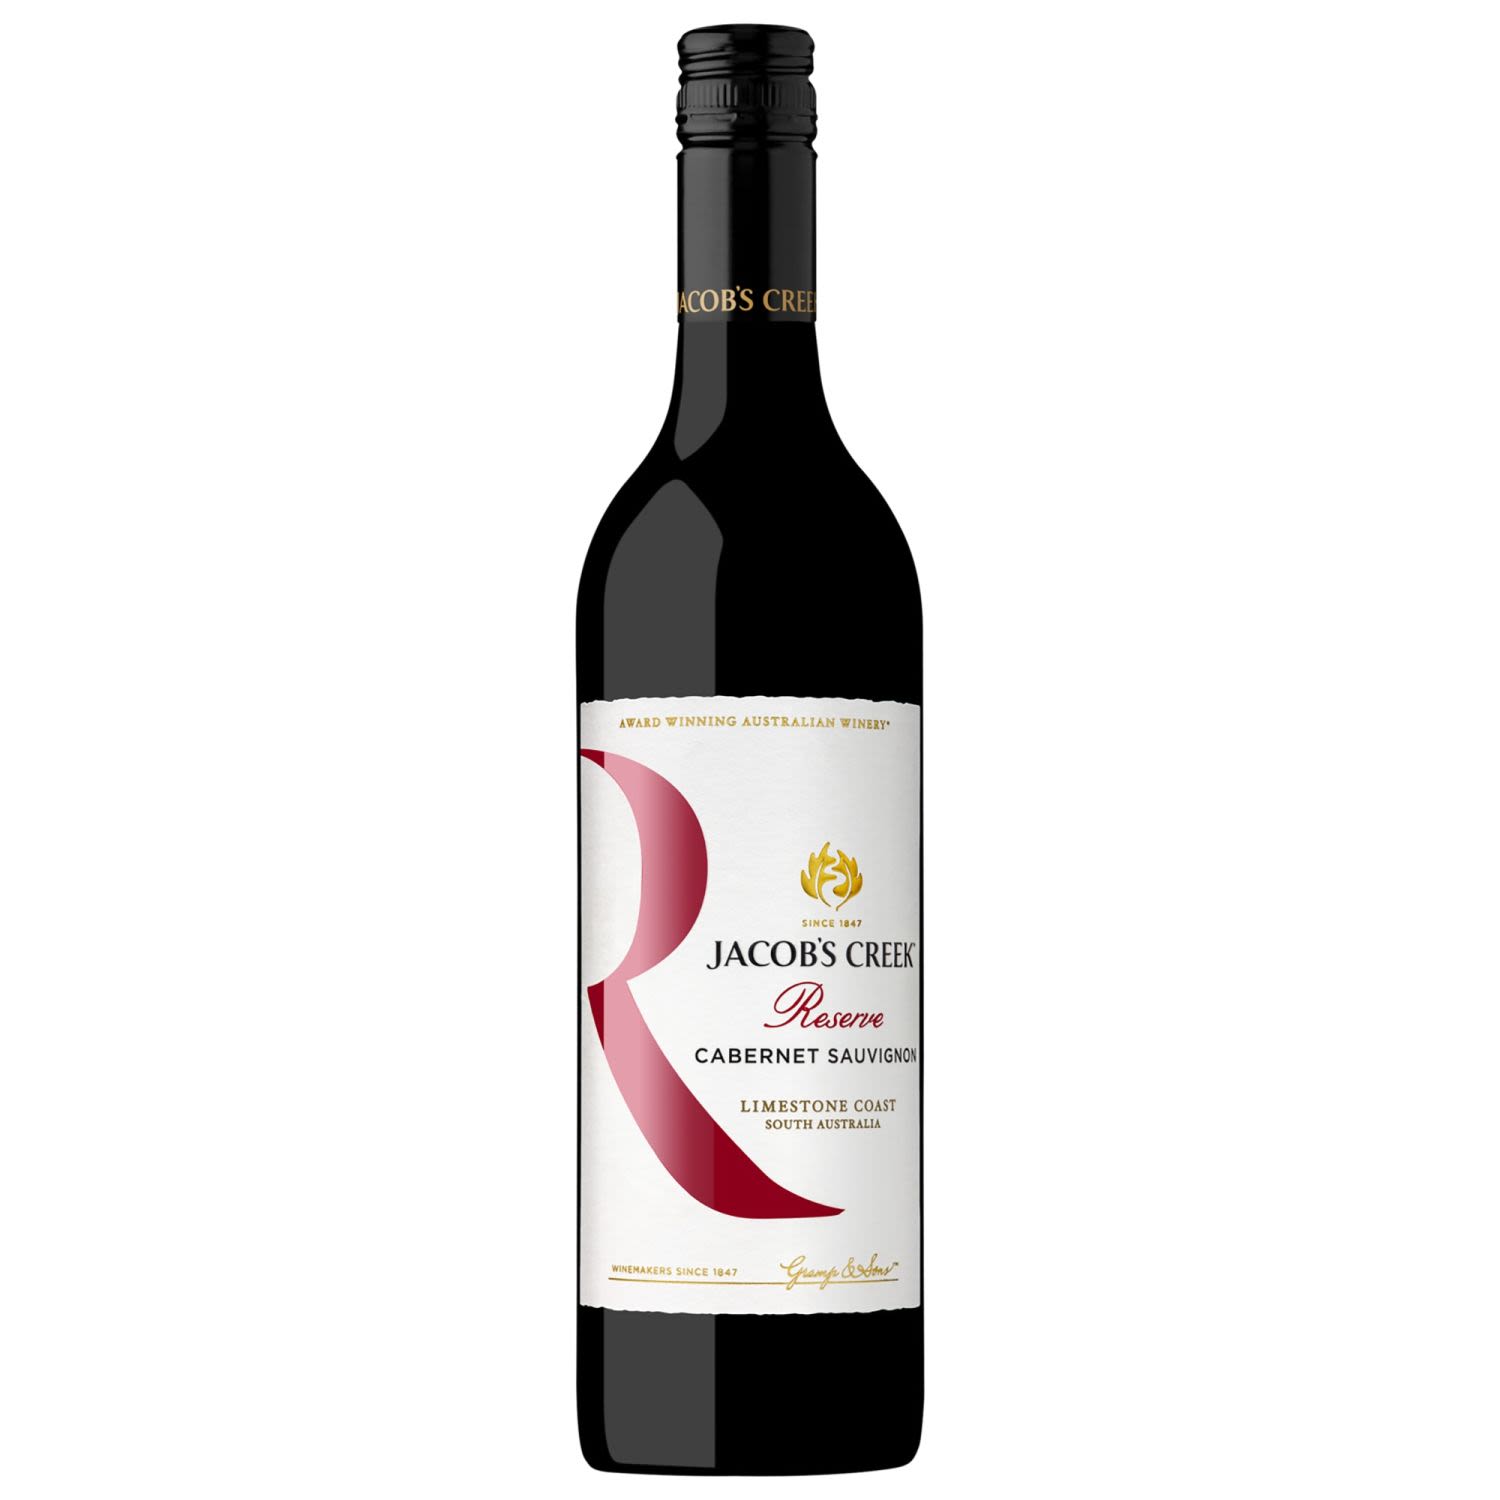 Soft approachable tannins with spicy cinnamon and oak flavours.  *Vintages may vary<br /> <br />Alcohol Volume: 13.00%<br /><br />Pack Format: Bottle<br /><br />Standard Drinks: 8.3</br /><br />Pack Type: Bottle<br /><br />Country of Origin: Australia<br /><br />Region: Limestone Coast<br /><br />Vintage: Vintages Vary<br />